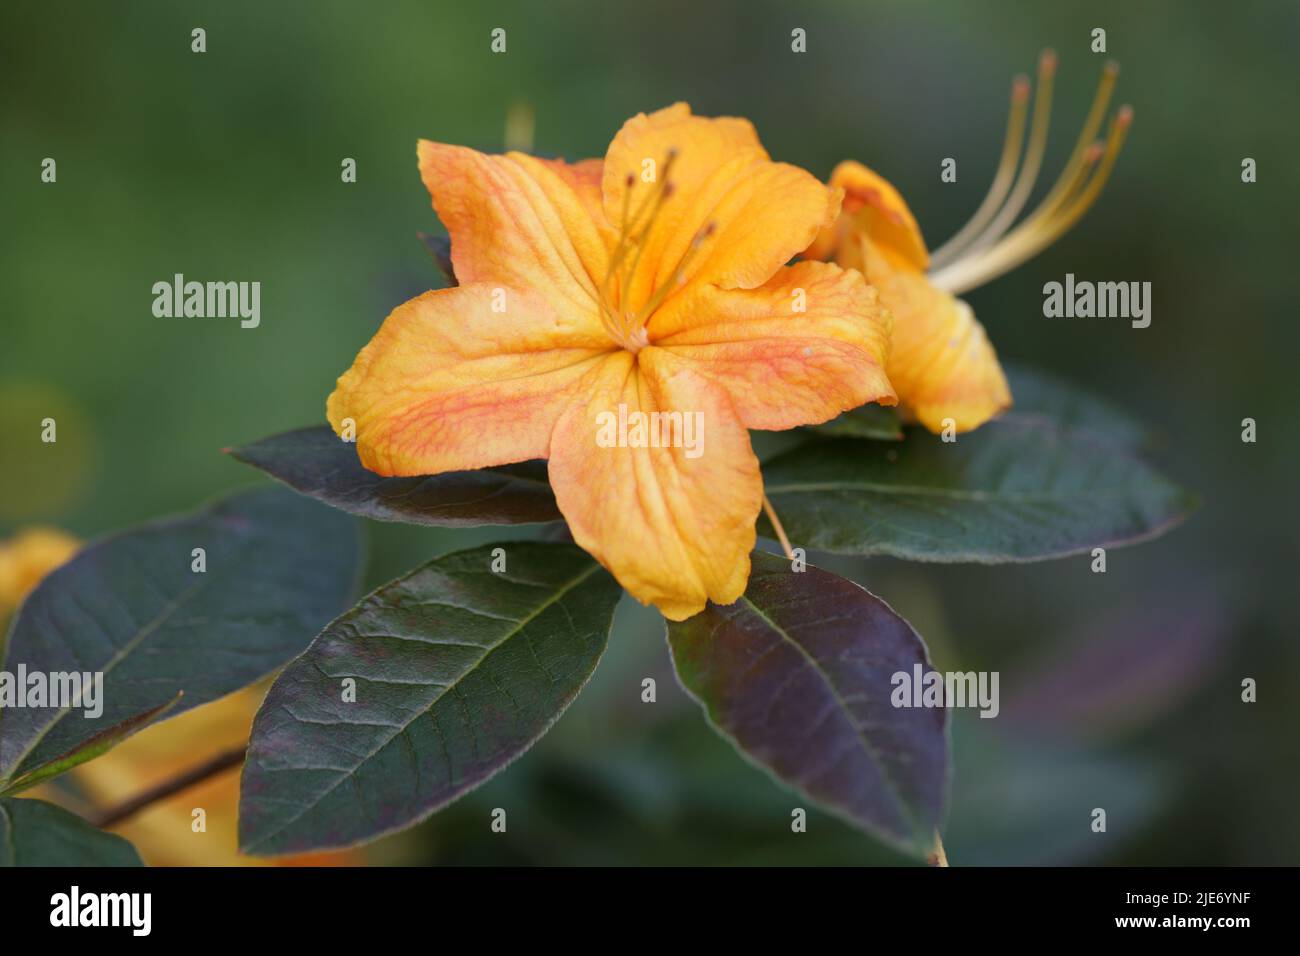 Closeup view of Rhododendron flowers in a garden Stock Photo